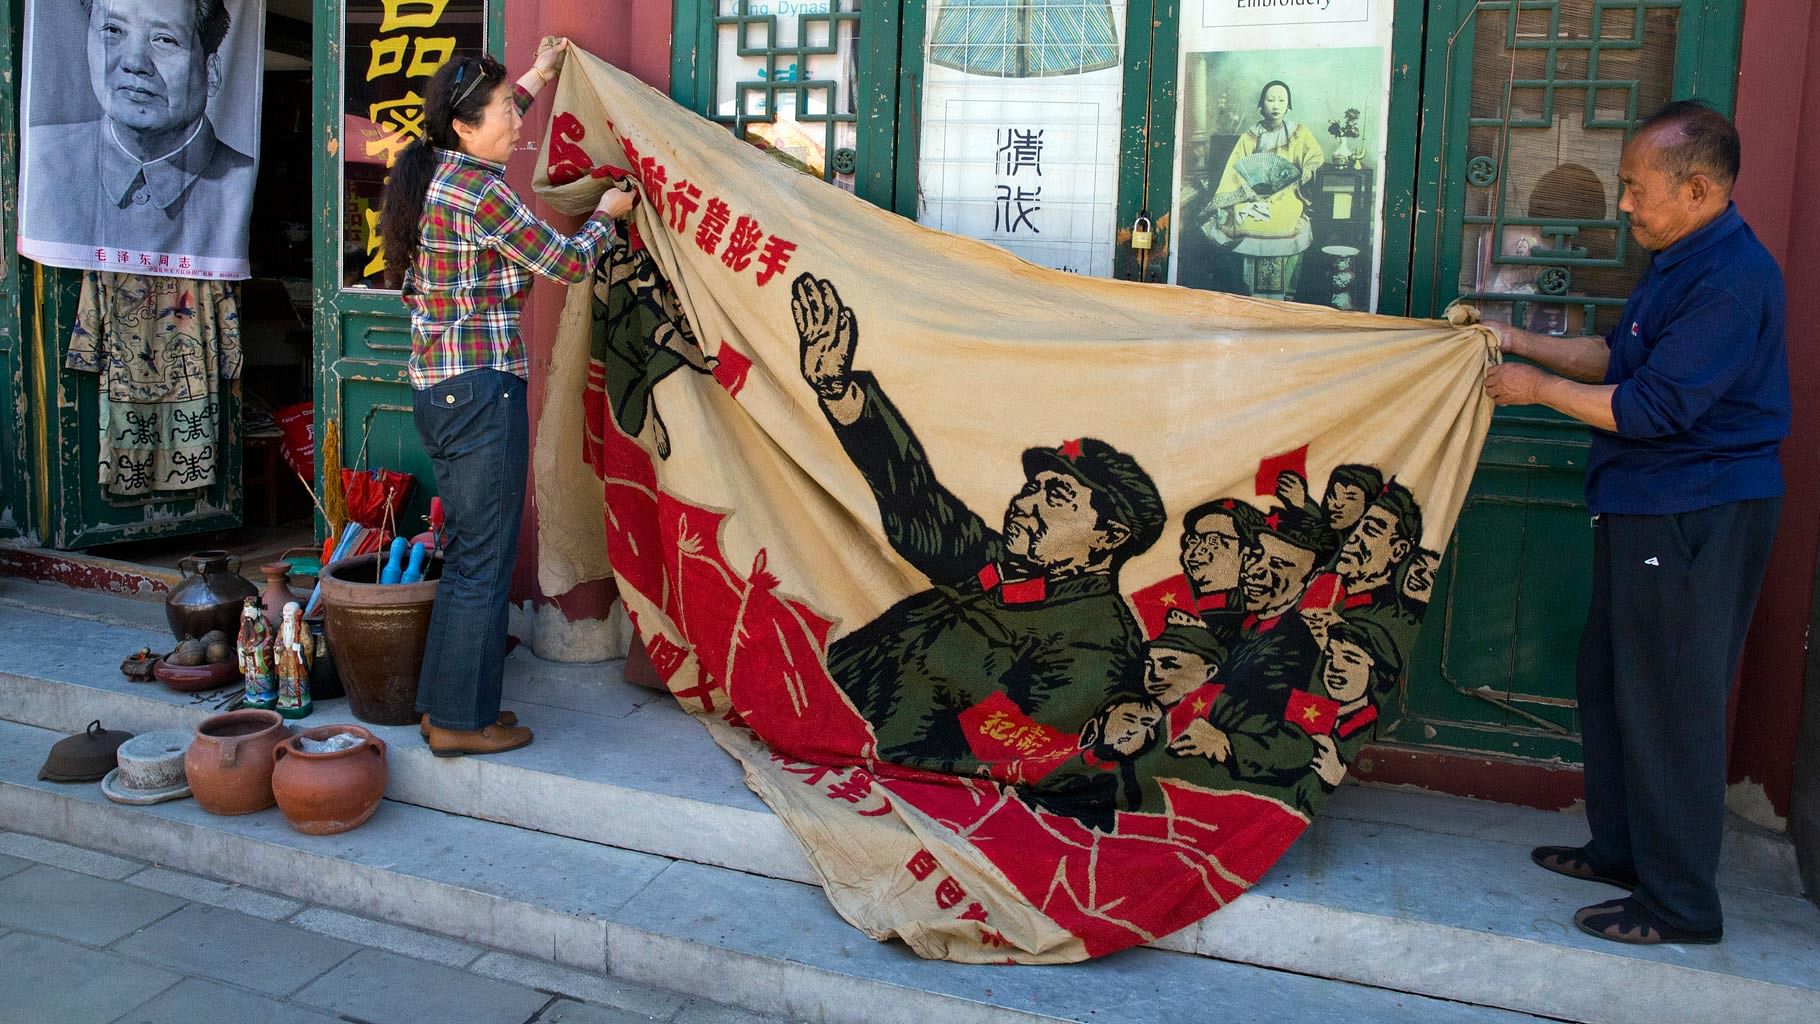 Vendors unfurl a banner from 1969 depicting former Chinese leader Mao Zedong as he “inspects the great army of the Cultural Revolution”. (Photo: AP)